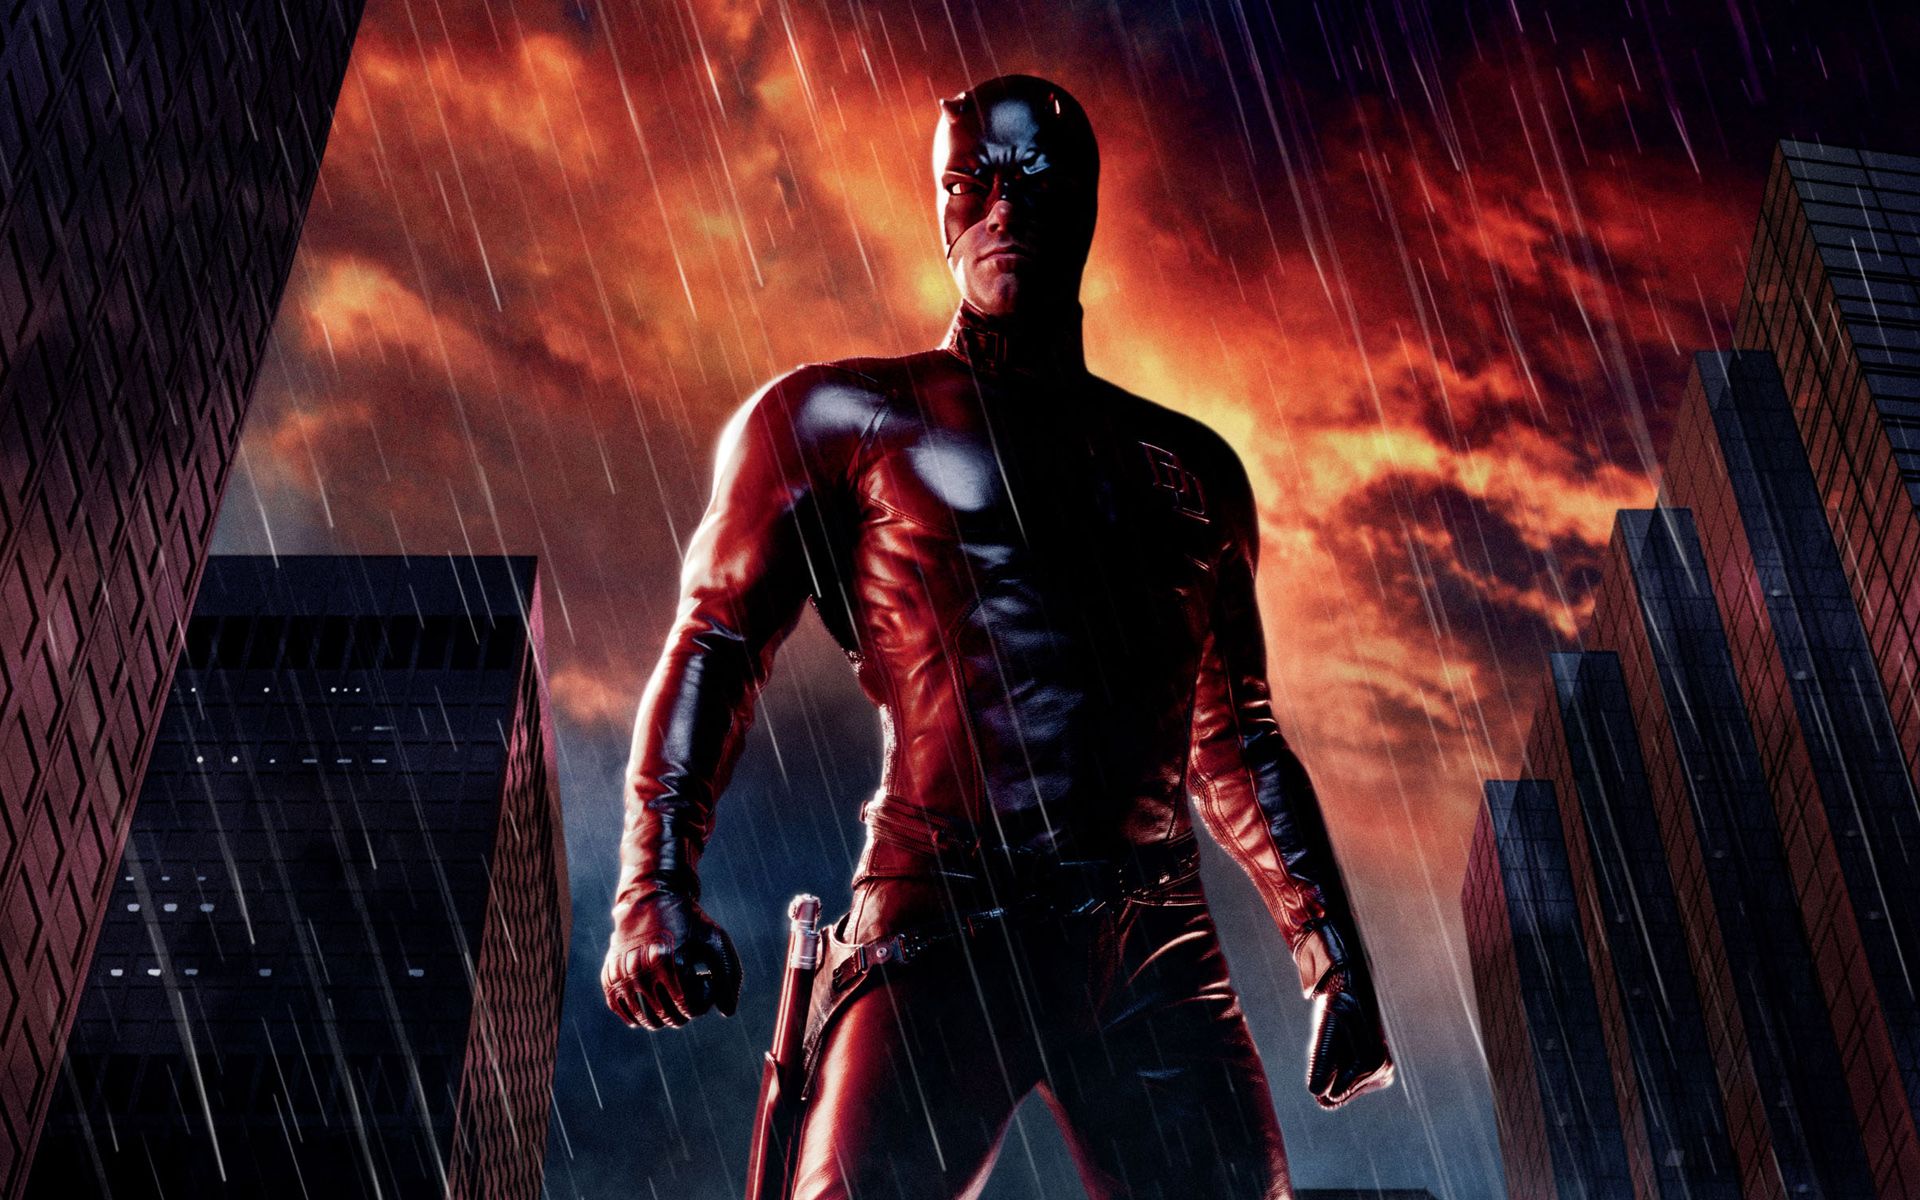 Daredevil 4K wallpaper for your desktop or mobile screen free and easy to download